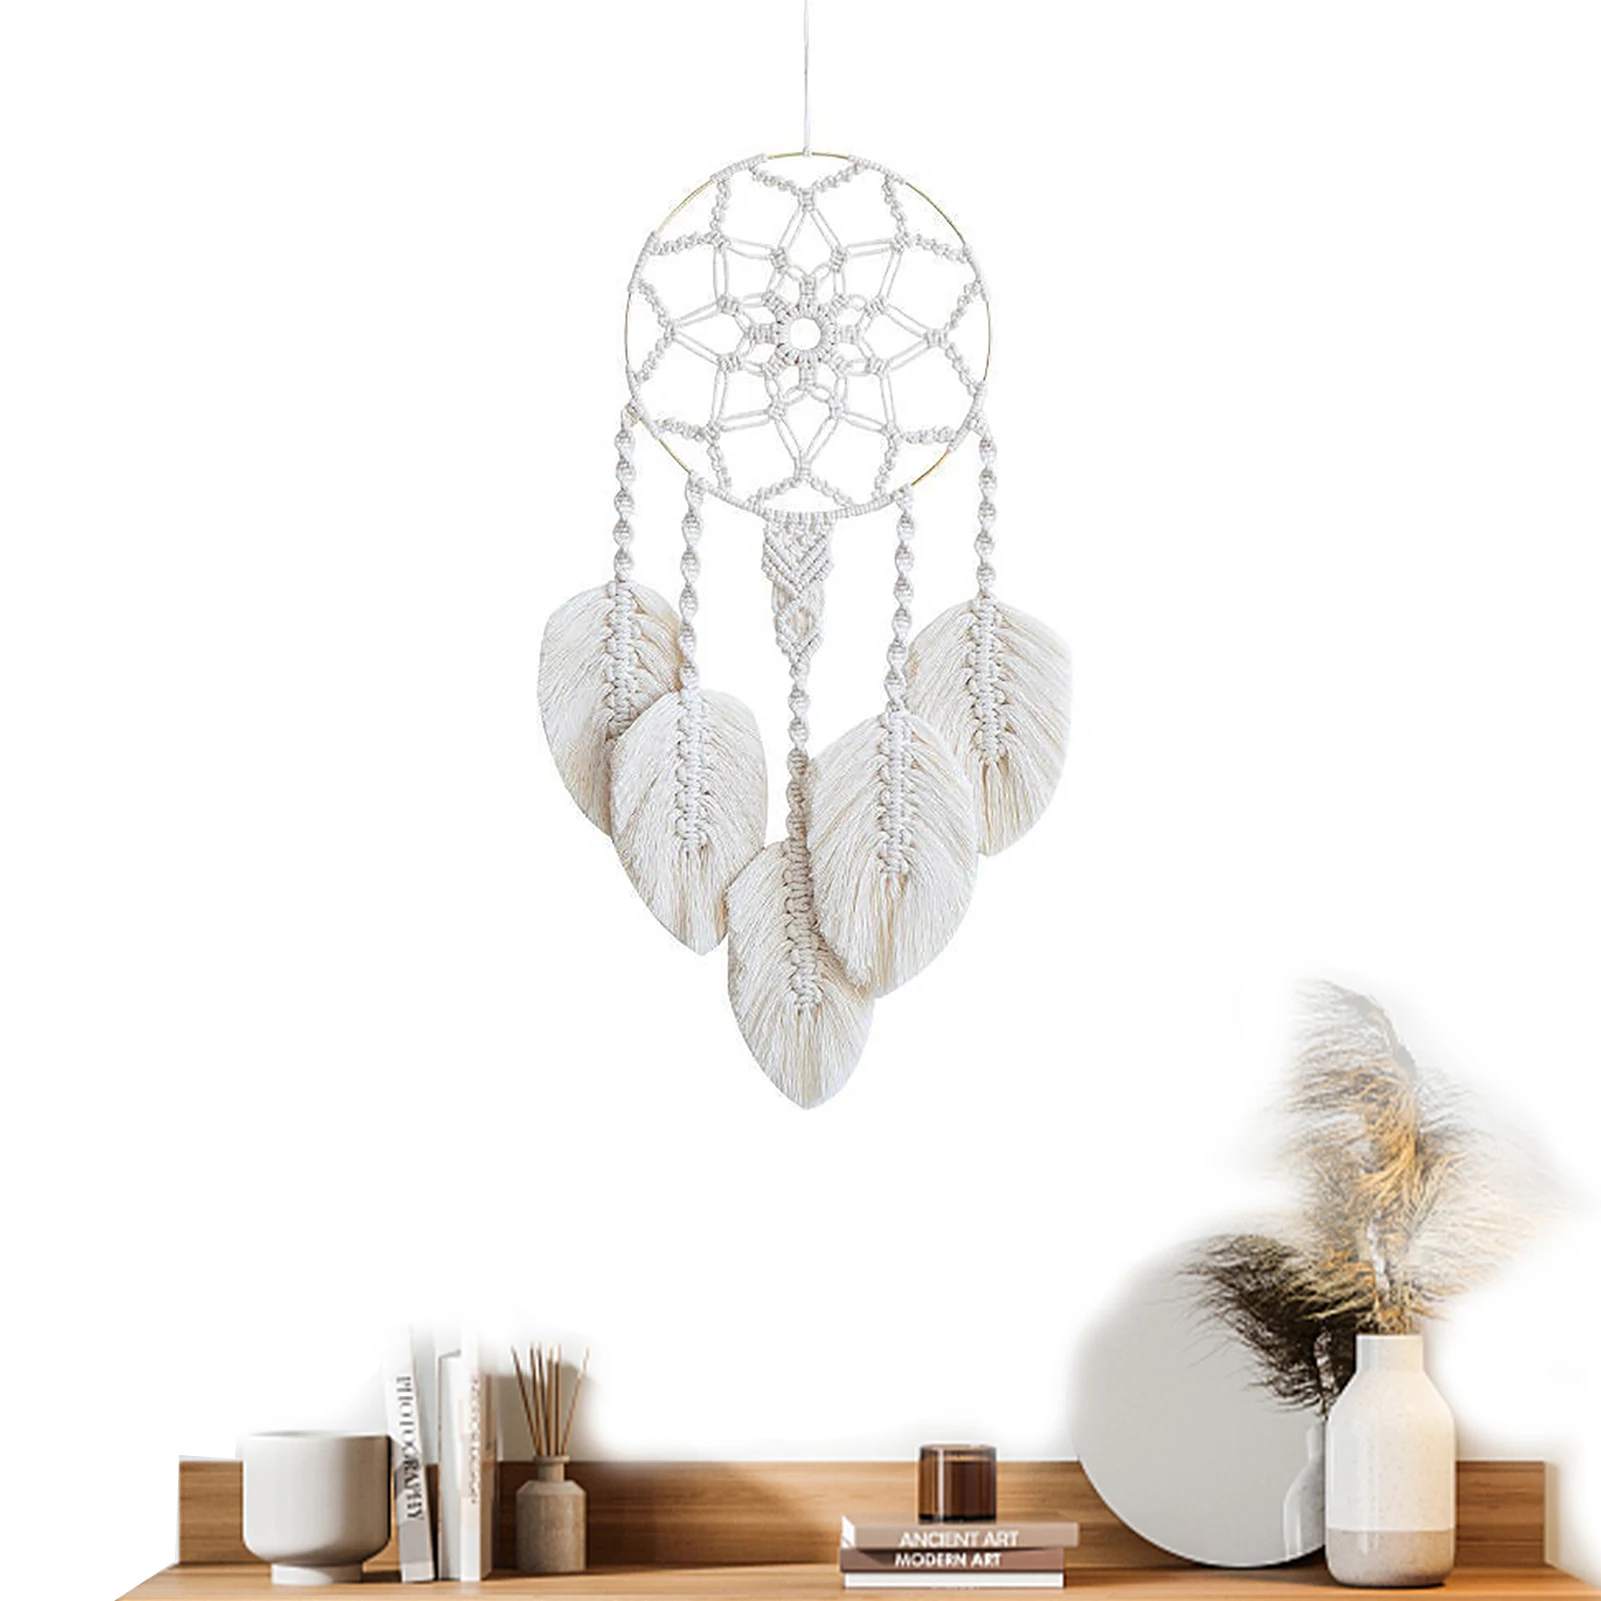 

Boho Wall Tapestry White Boho DreamCatchers Wall Decor For Bedroom Living Room 25.59 X 9.84 Inches